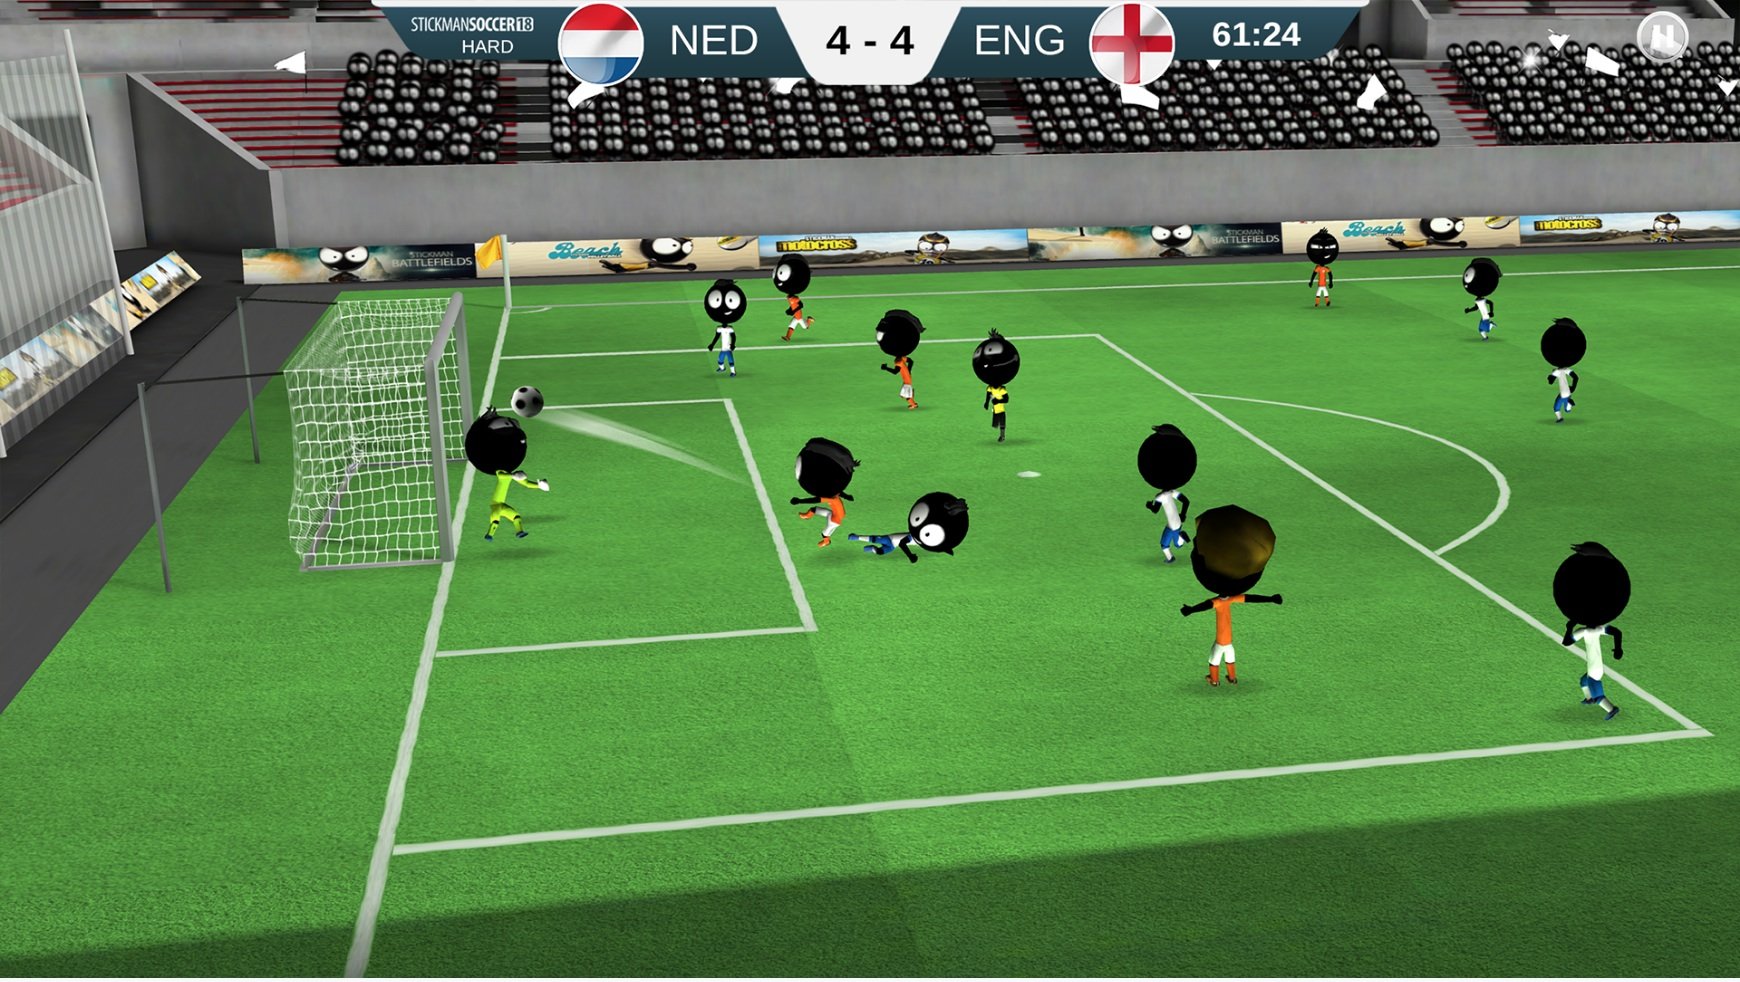 Stickman Soccer 2018 strengthens its options with a new update